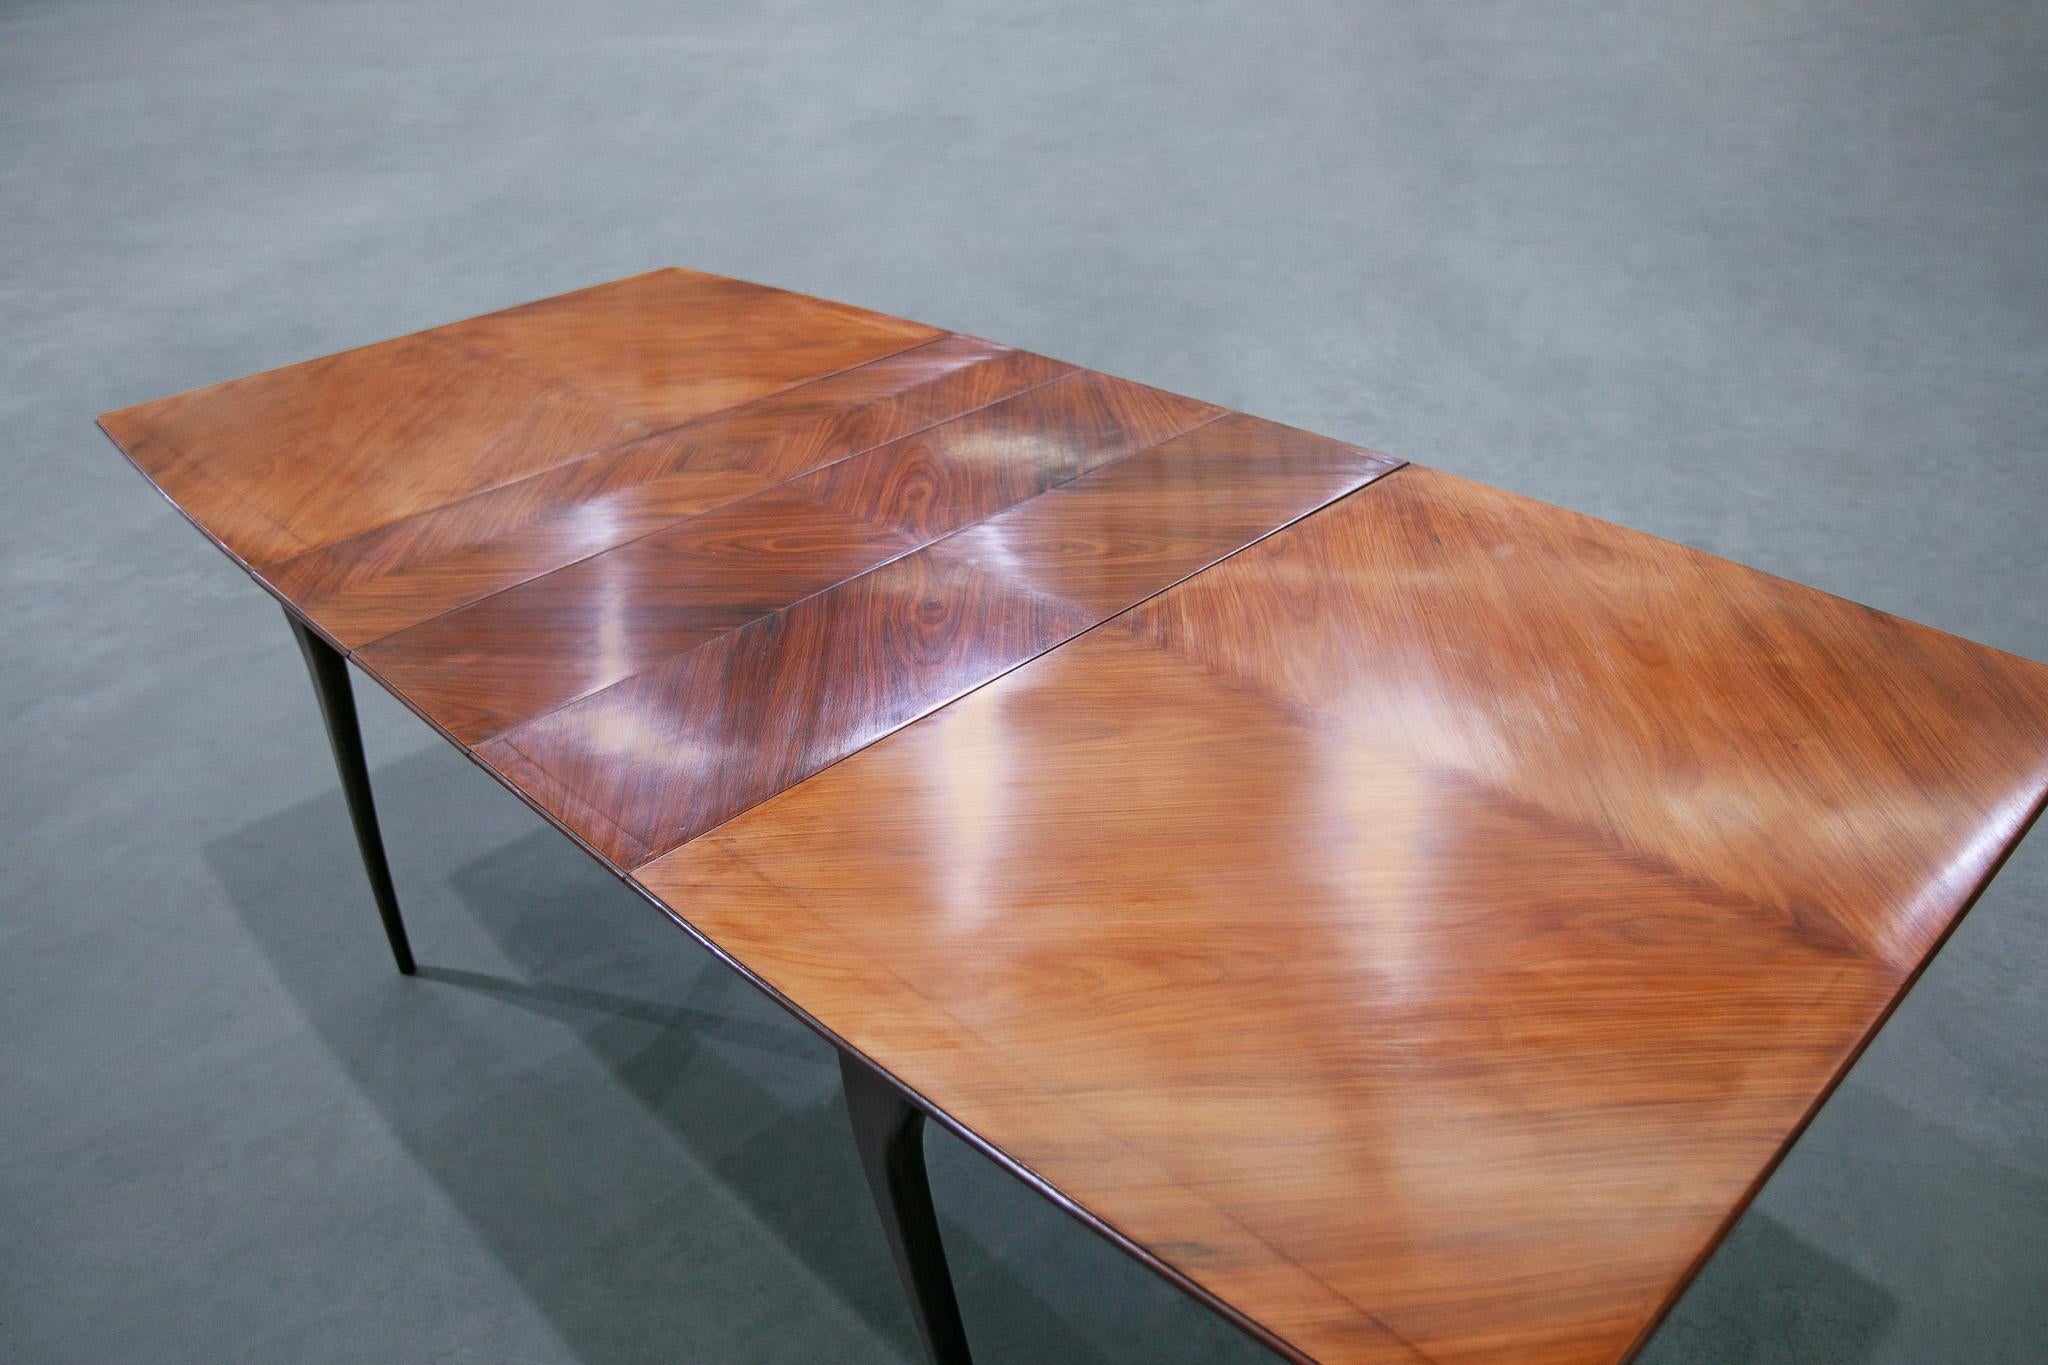 Available today, this Brazilian modern dining table made with Caviuna hardwood is a beautiful piece of furniture!

This table was made in Brazil and is made out of Caviana hardwood. It has many features of what many Brazilian modern dining tables